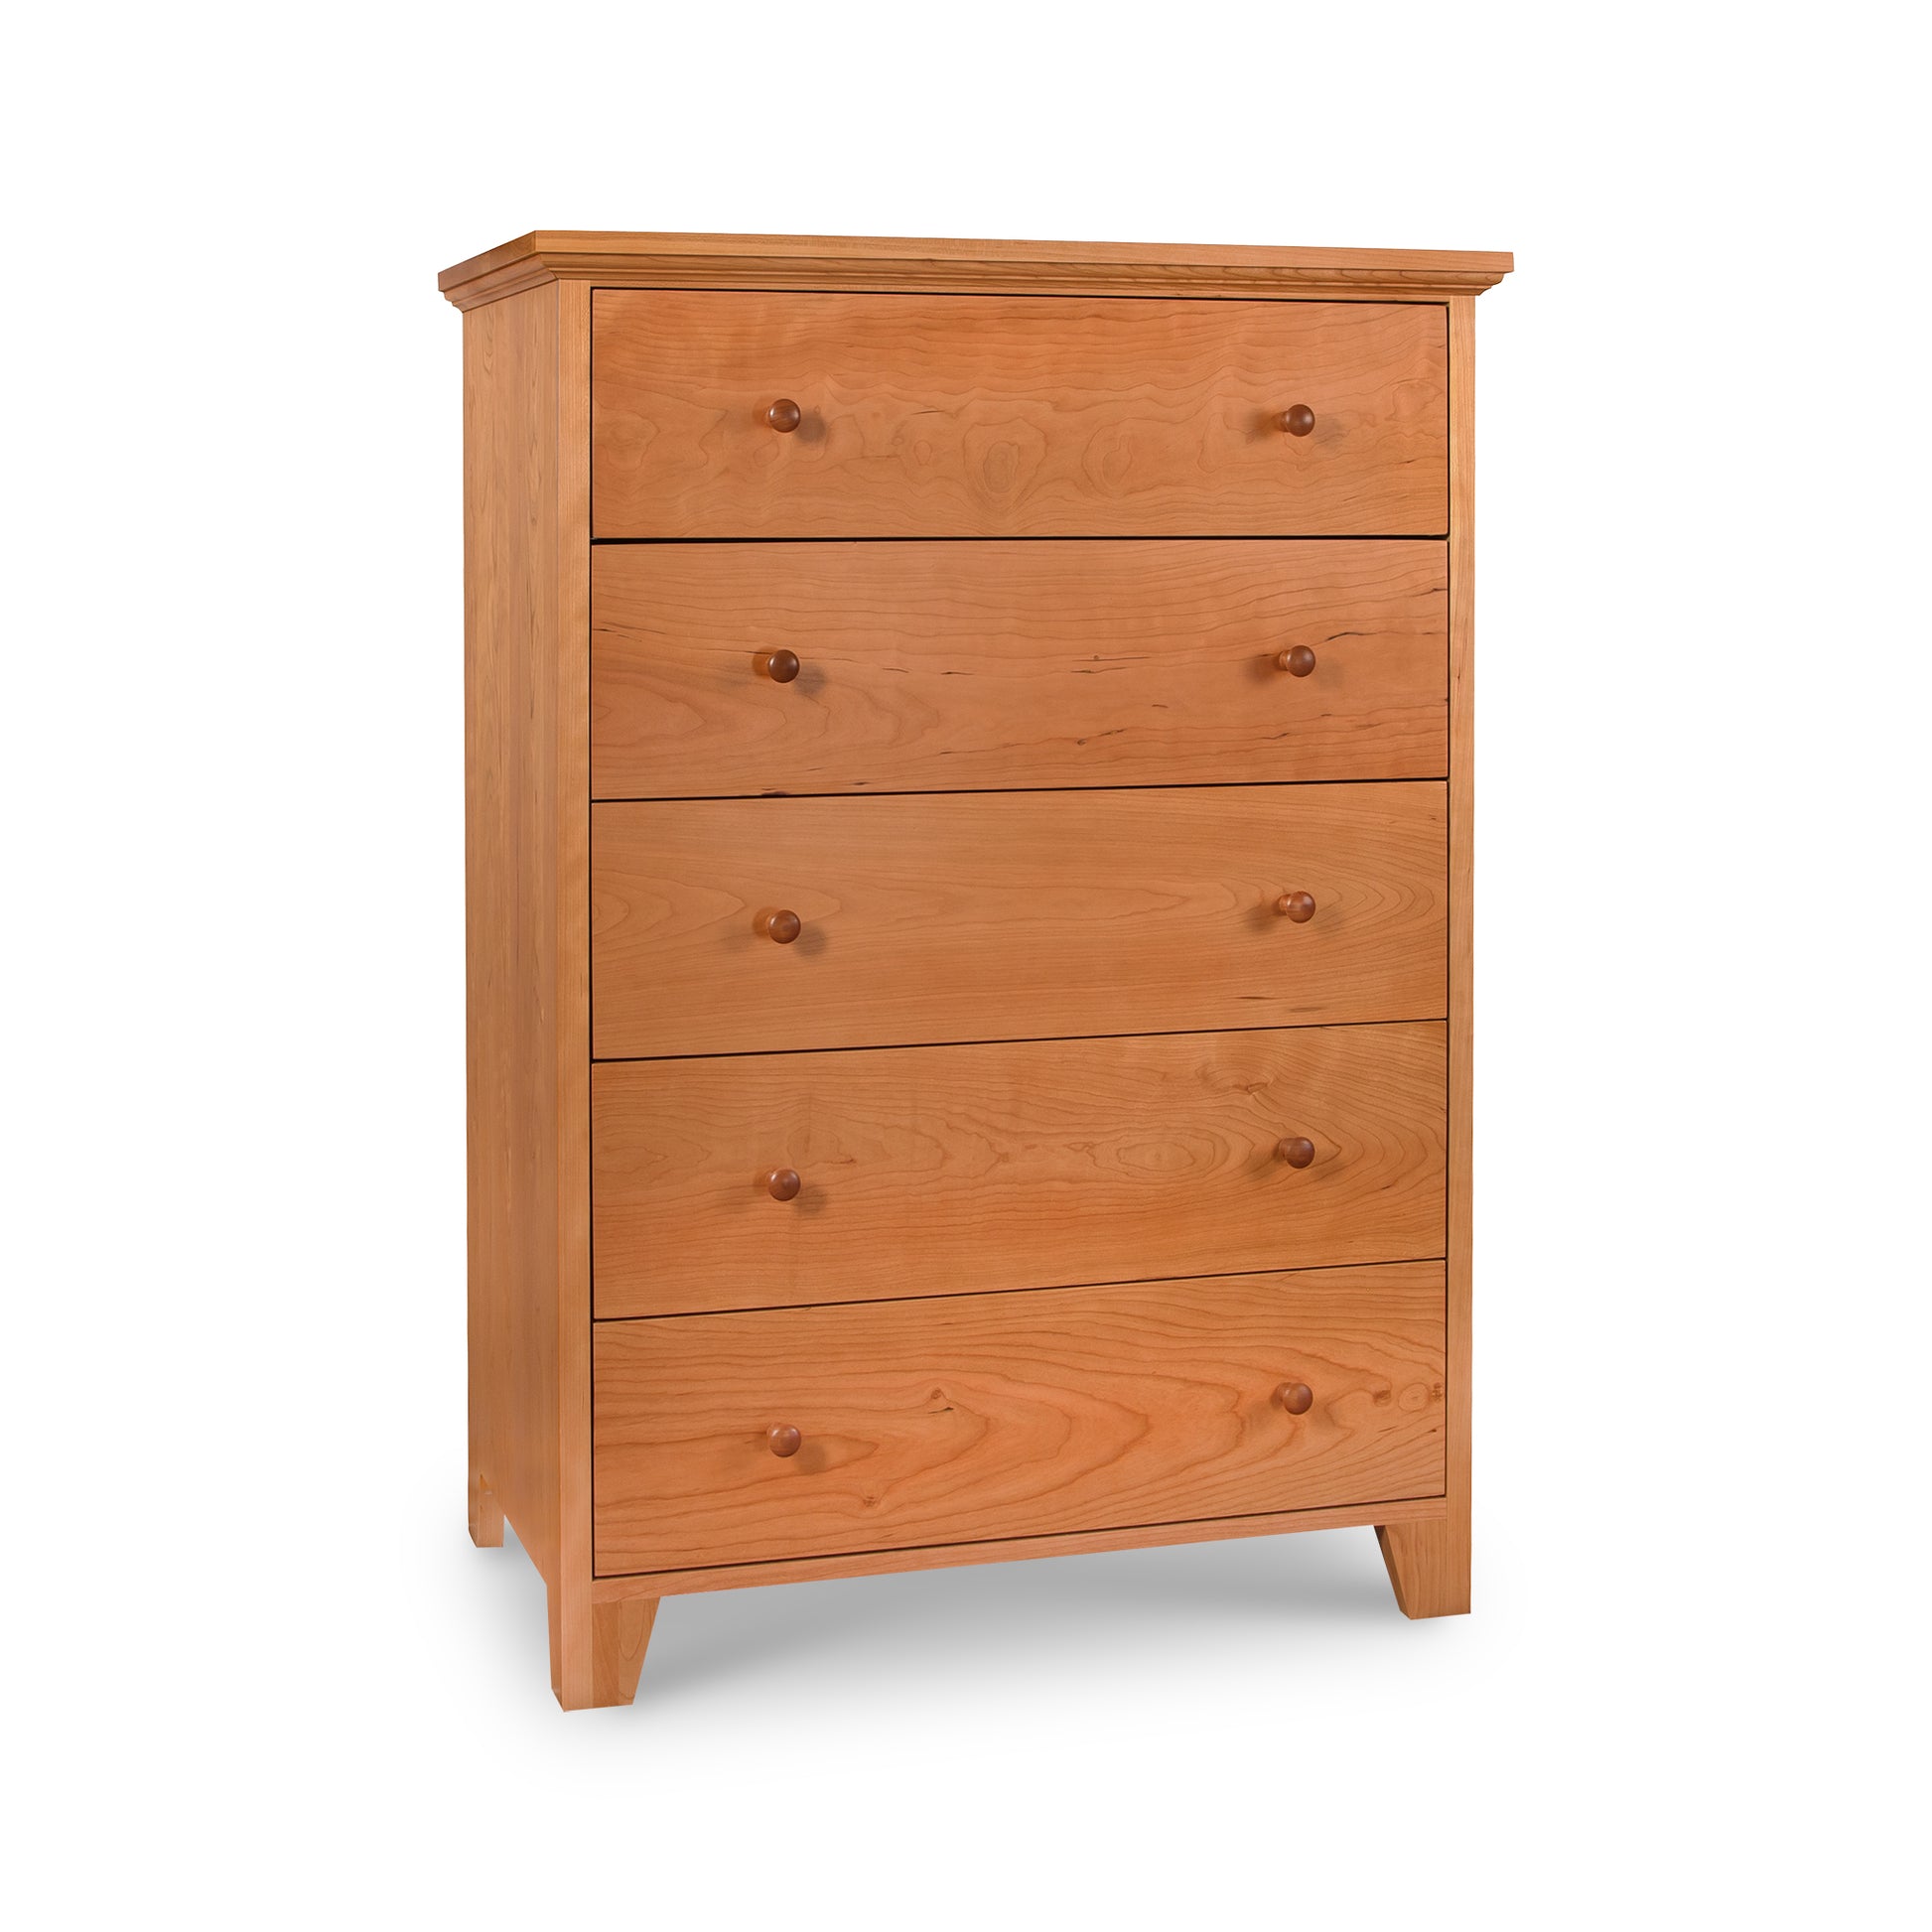 An American Country 5-Drawer Chest by Lyndon Furniture on a white background.